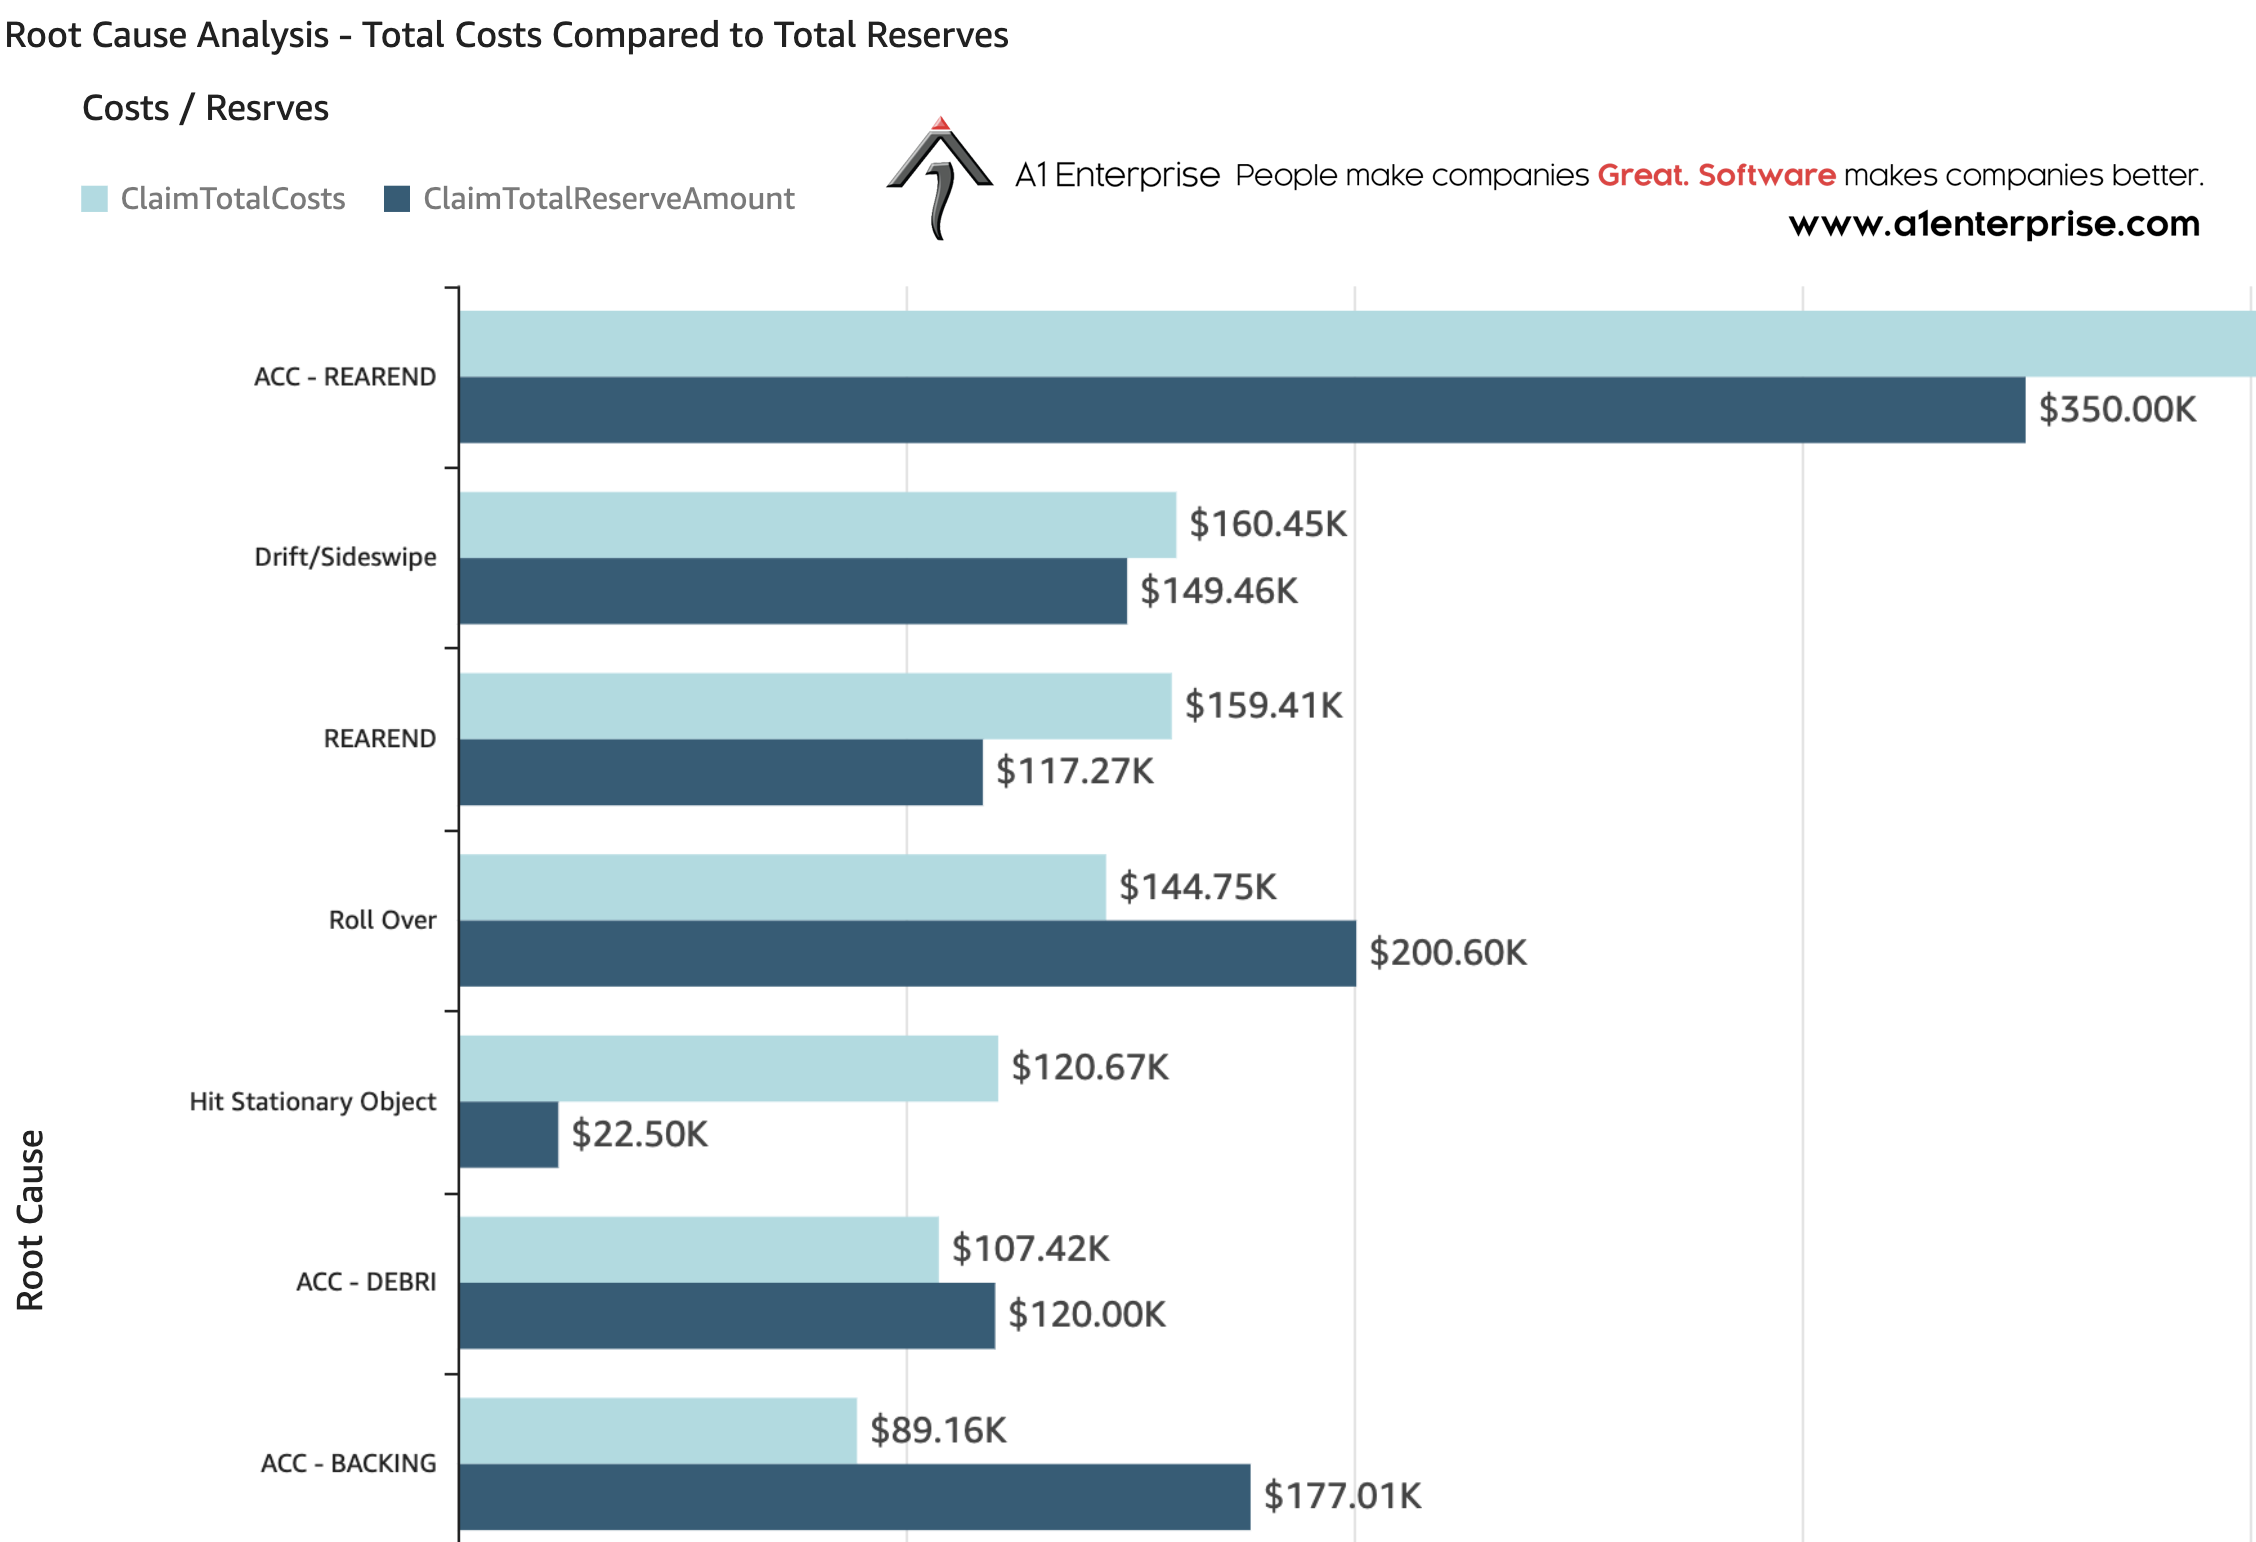 A1 Tracker Enterprise Claims and Incident Management analytics compare total claim costs to claim reserves by Root Cause. Root Cause indicates why the incident occurred. This analytic gives insights how Root Causes impact company financials and forecasts.